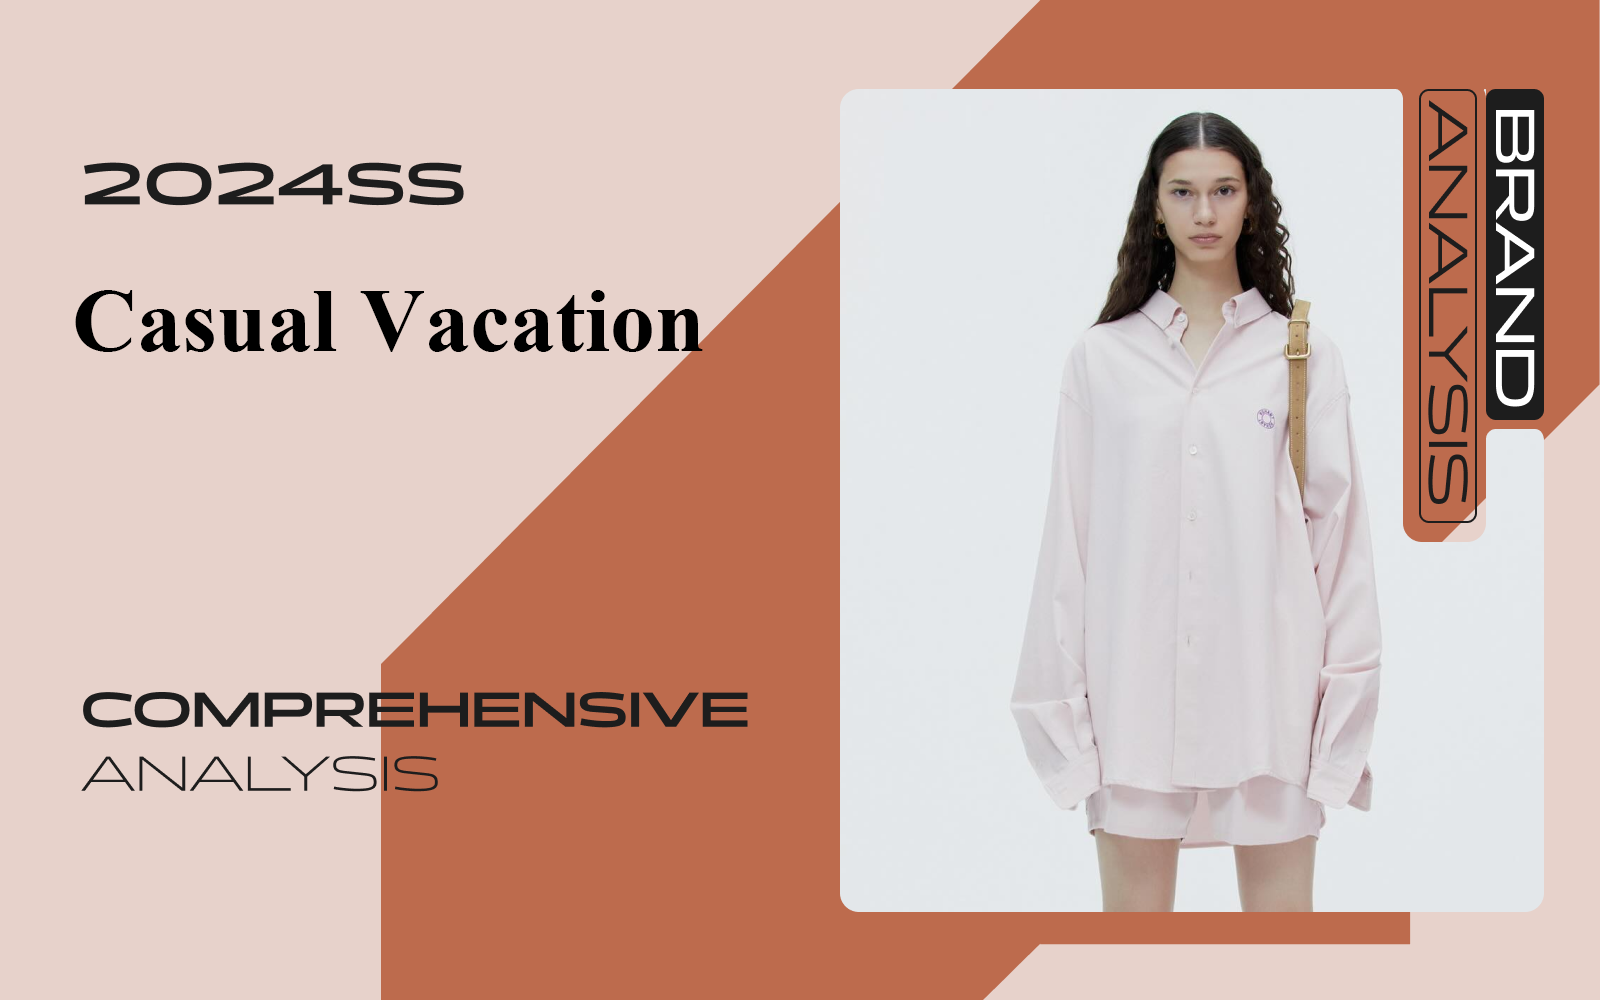 Casual Vacation -- The Comprehensive Analysis of Women's Fashion Designer Brands